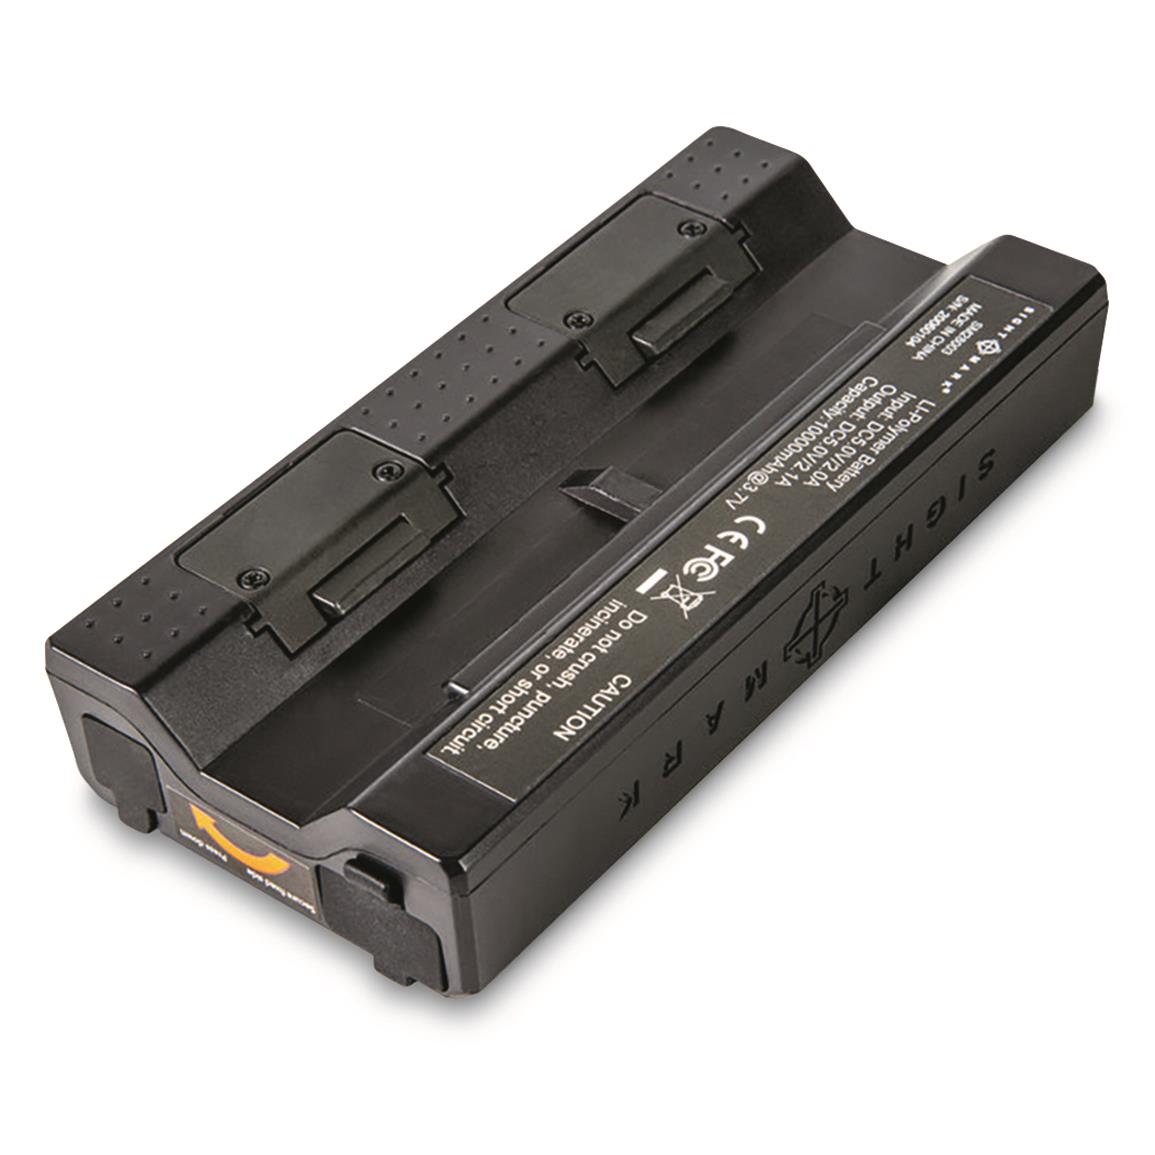 Sightmark Quick-Detach 5V Scope Rechargeable Battery Pack